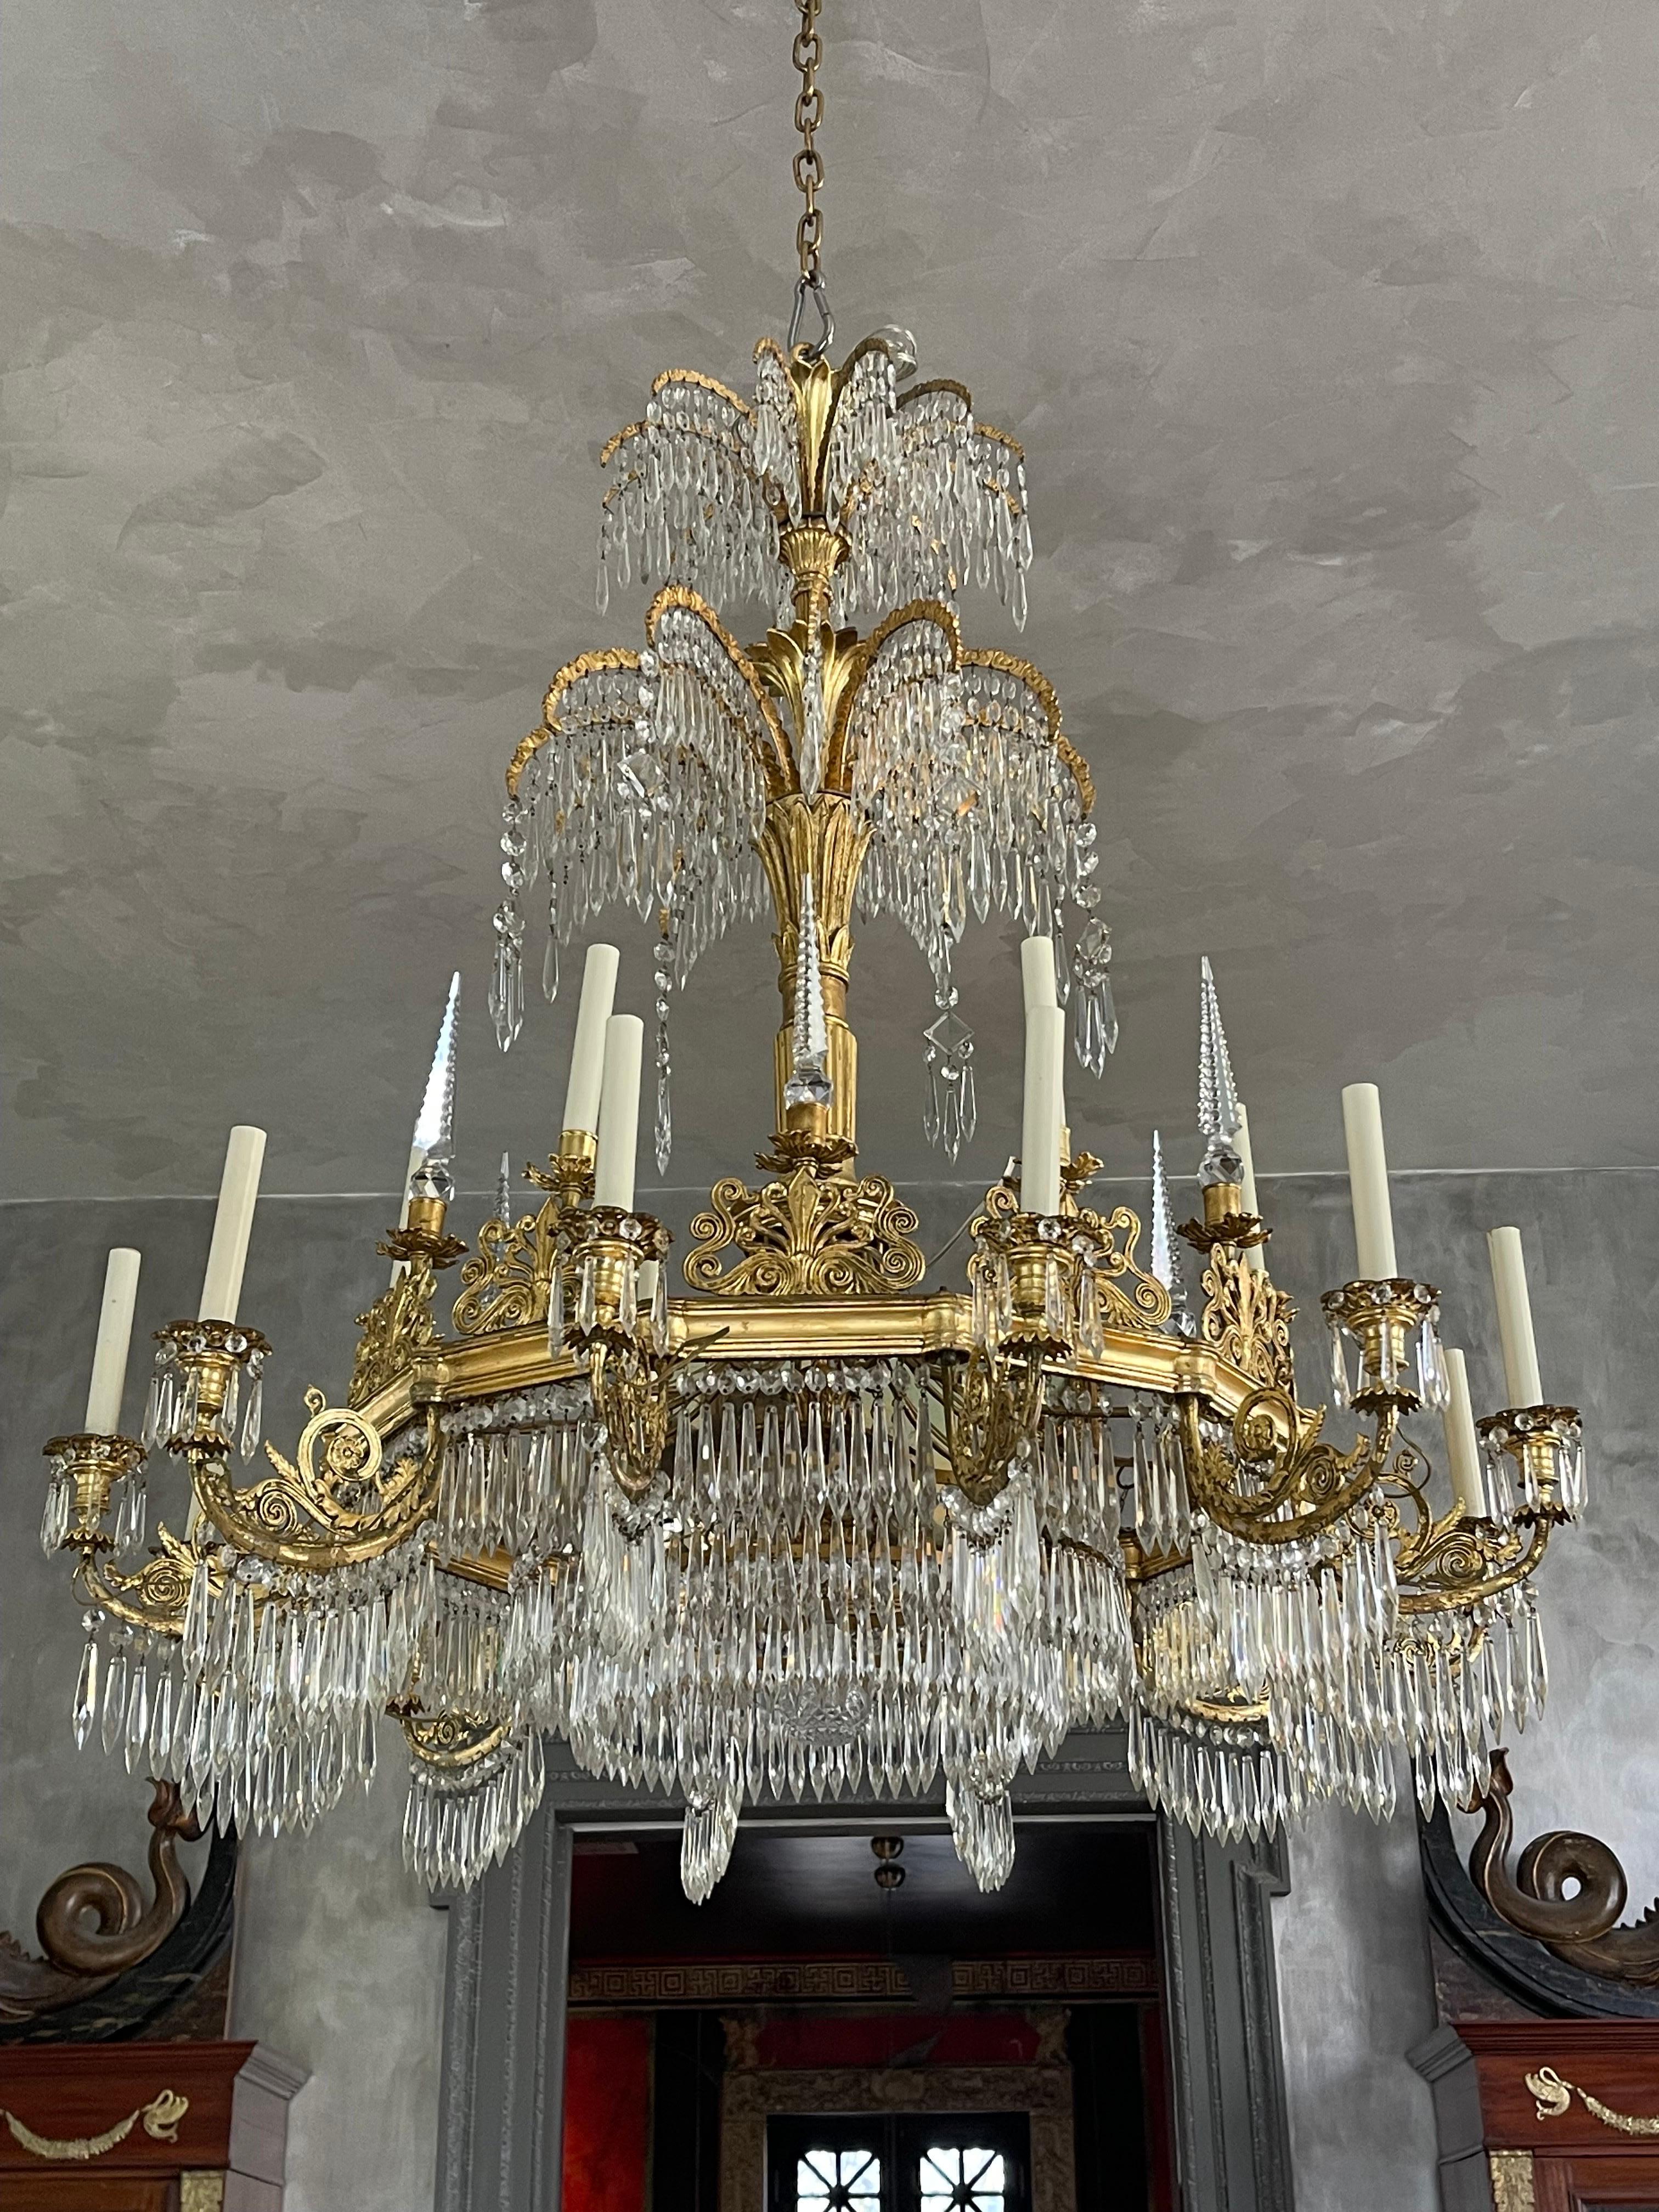 Magnificent Empire period gilt metal and crystal 18 arm chandelier designed by Germany’s premier architect at the time Karl Friedrich Schinkel, who was responsible for erecting most of the palaces in Berlin and most notably the “Altes Museum”.